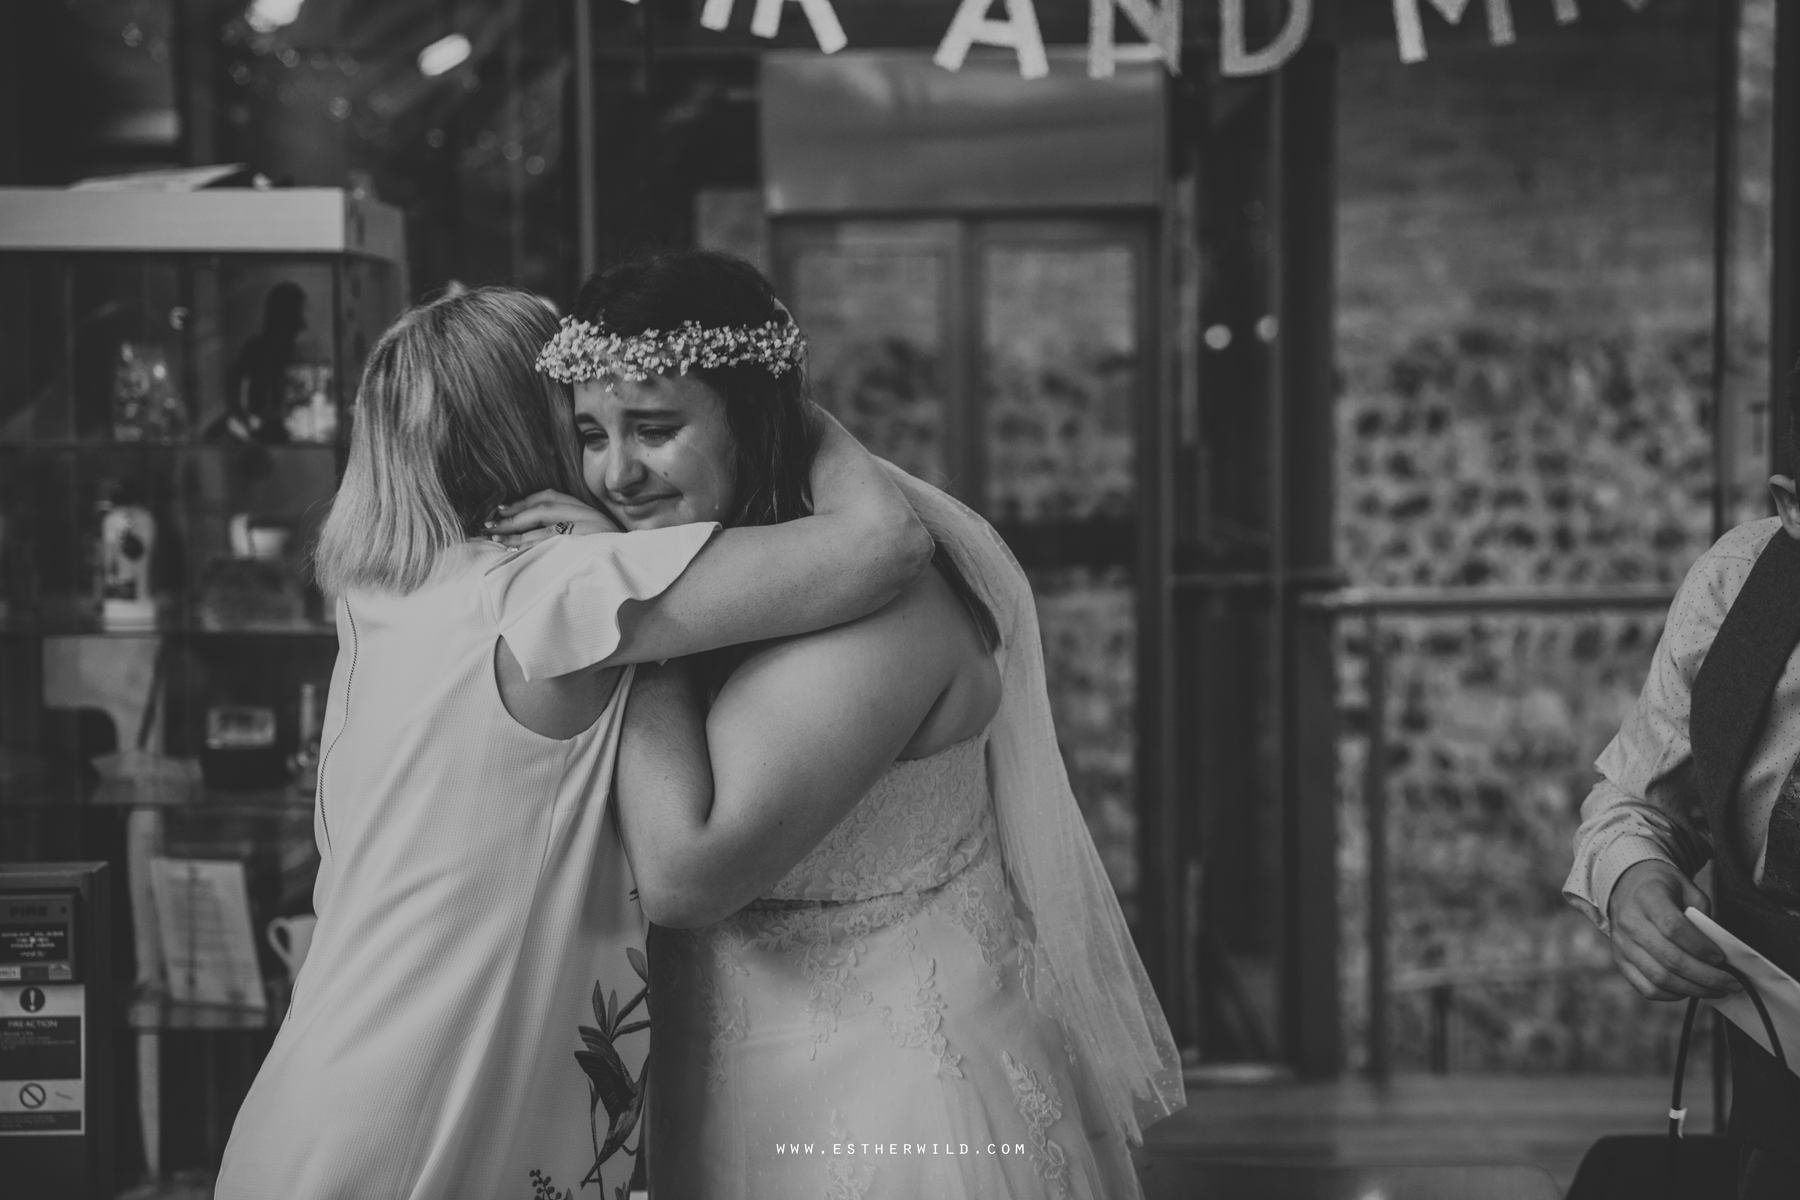 Norwich_Castle_Arcade_Grosvenor_Chip_Birdcage_Cathedral_Cloisters_Refectory_Wedding_Photography_Esther_Wild_Photographer_Norfolk_Kings_Lynn_3R8A2561-2.jpg